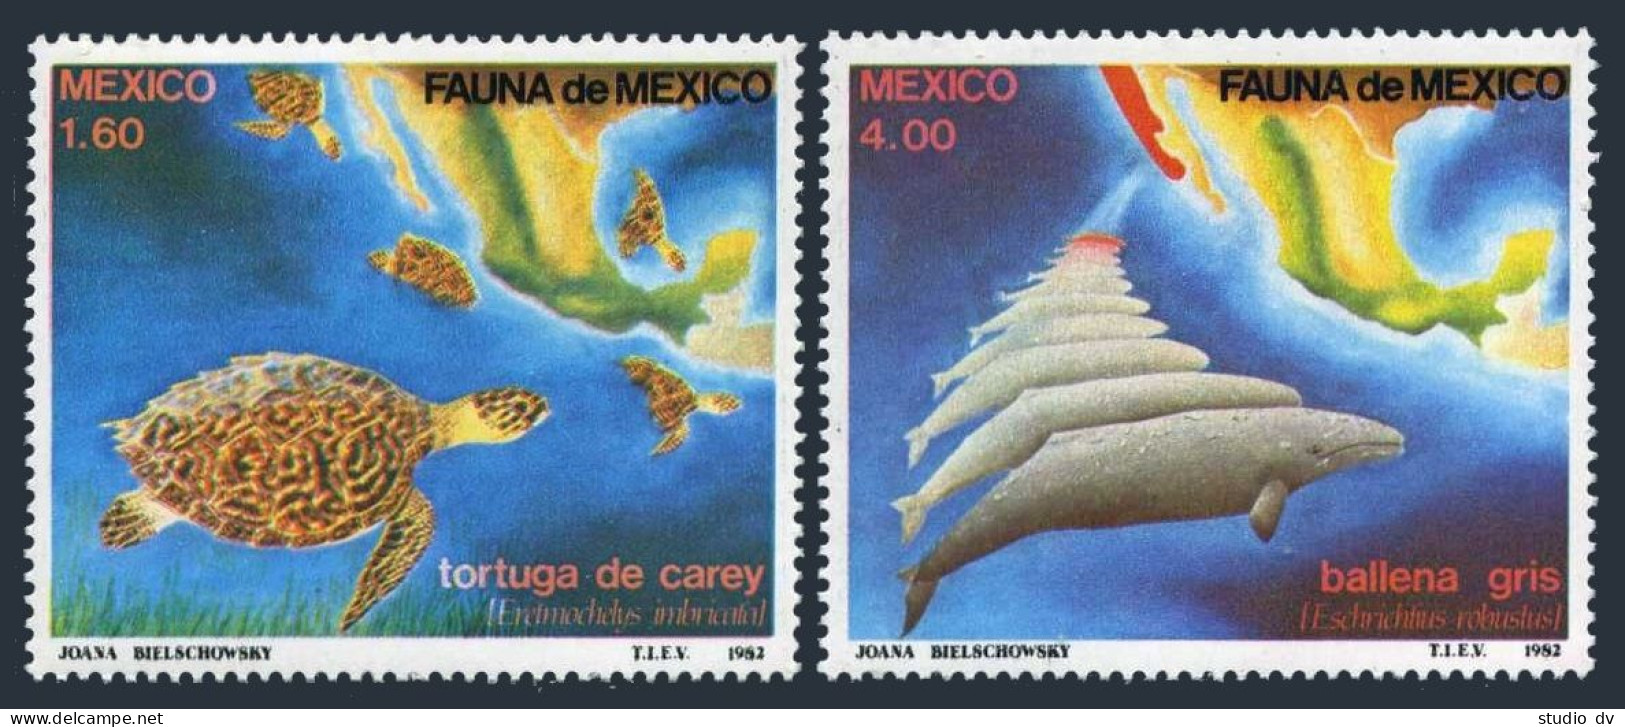 Mexico 1281-1282, MNH. Michel 1828-1829. Turtles, Gray Whales, 1982. - Mexique